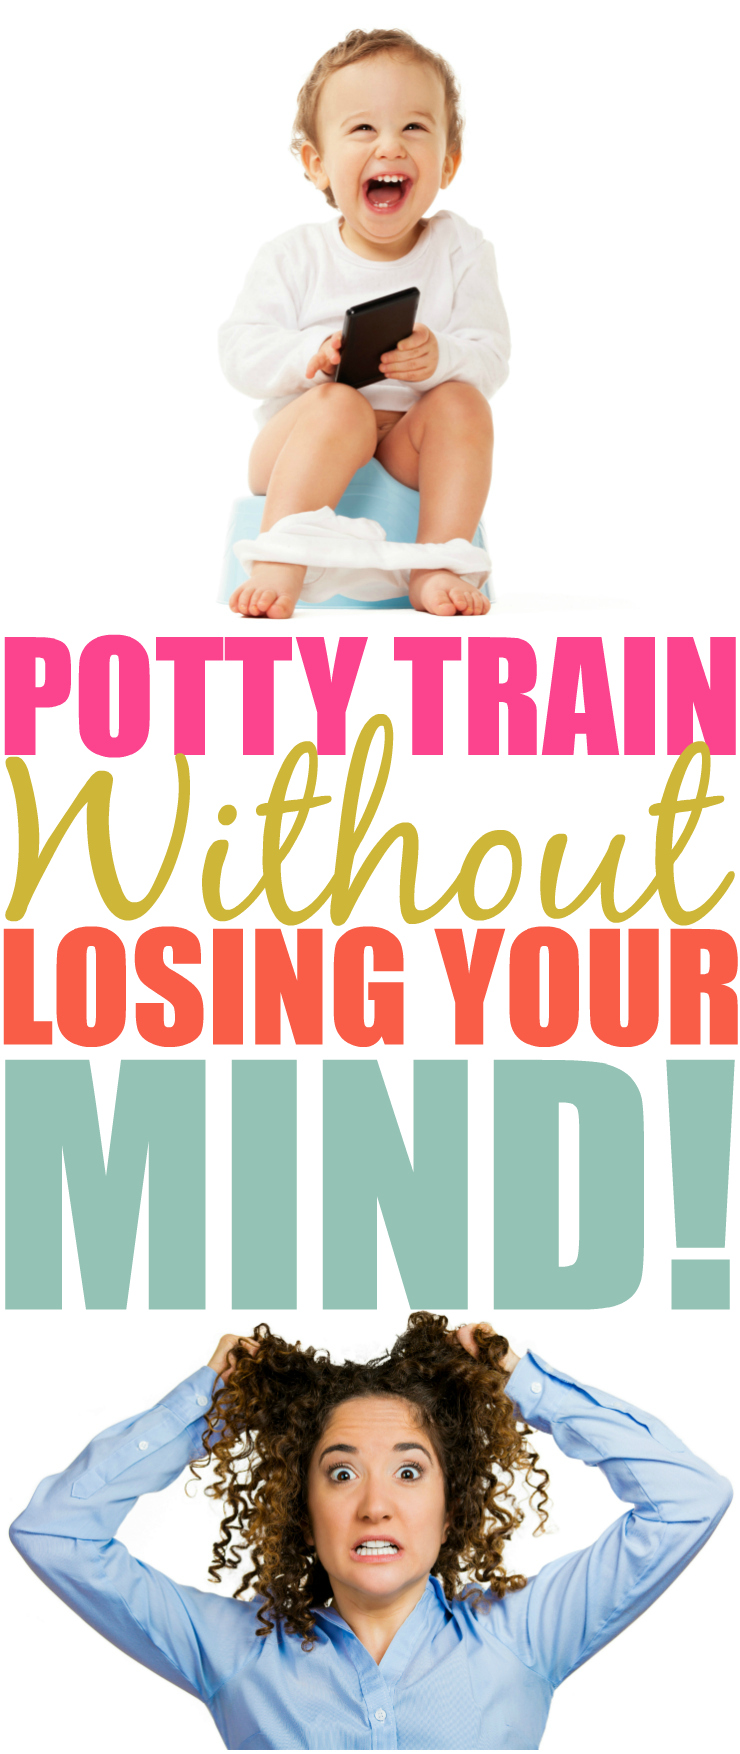 Potty Train Without Losing Your Mind